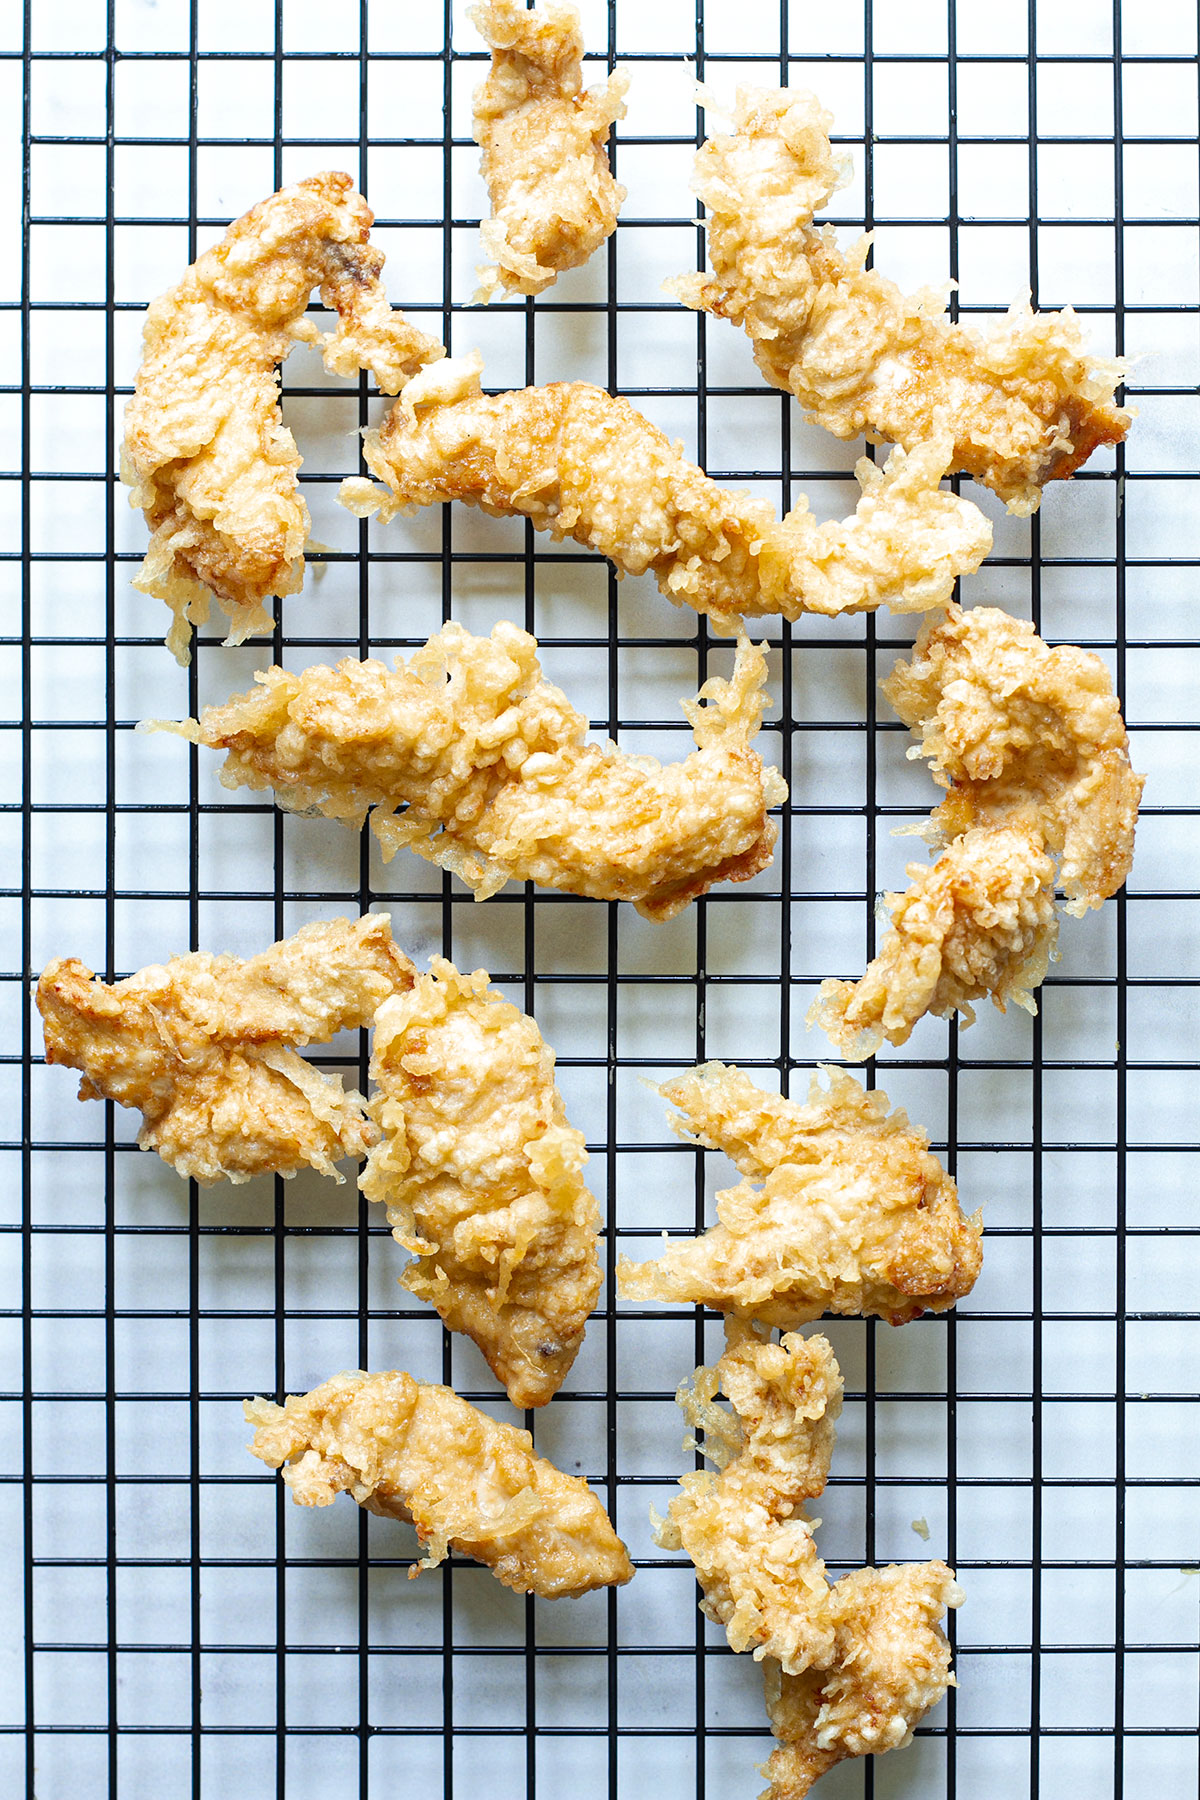 Fried battered chicken tempura pieces on a wire rack.